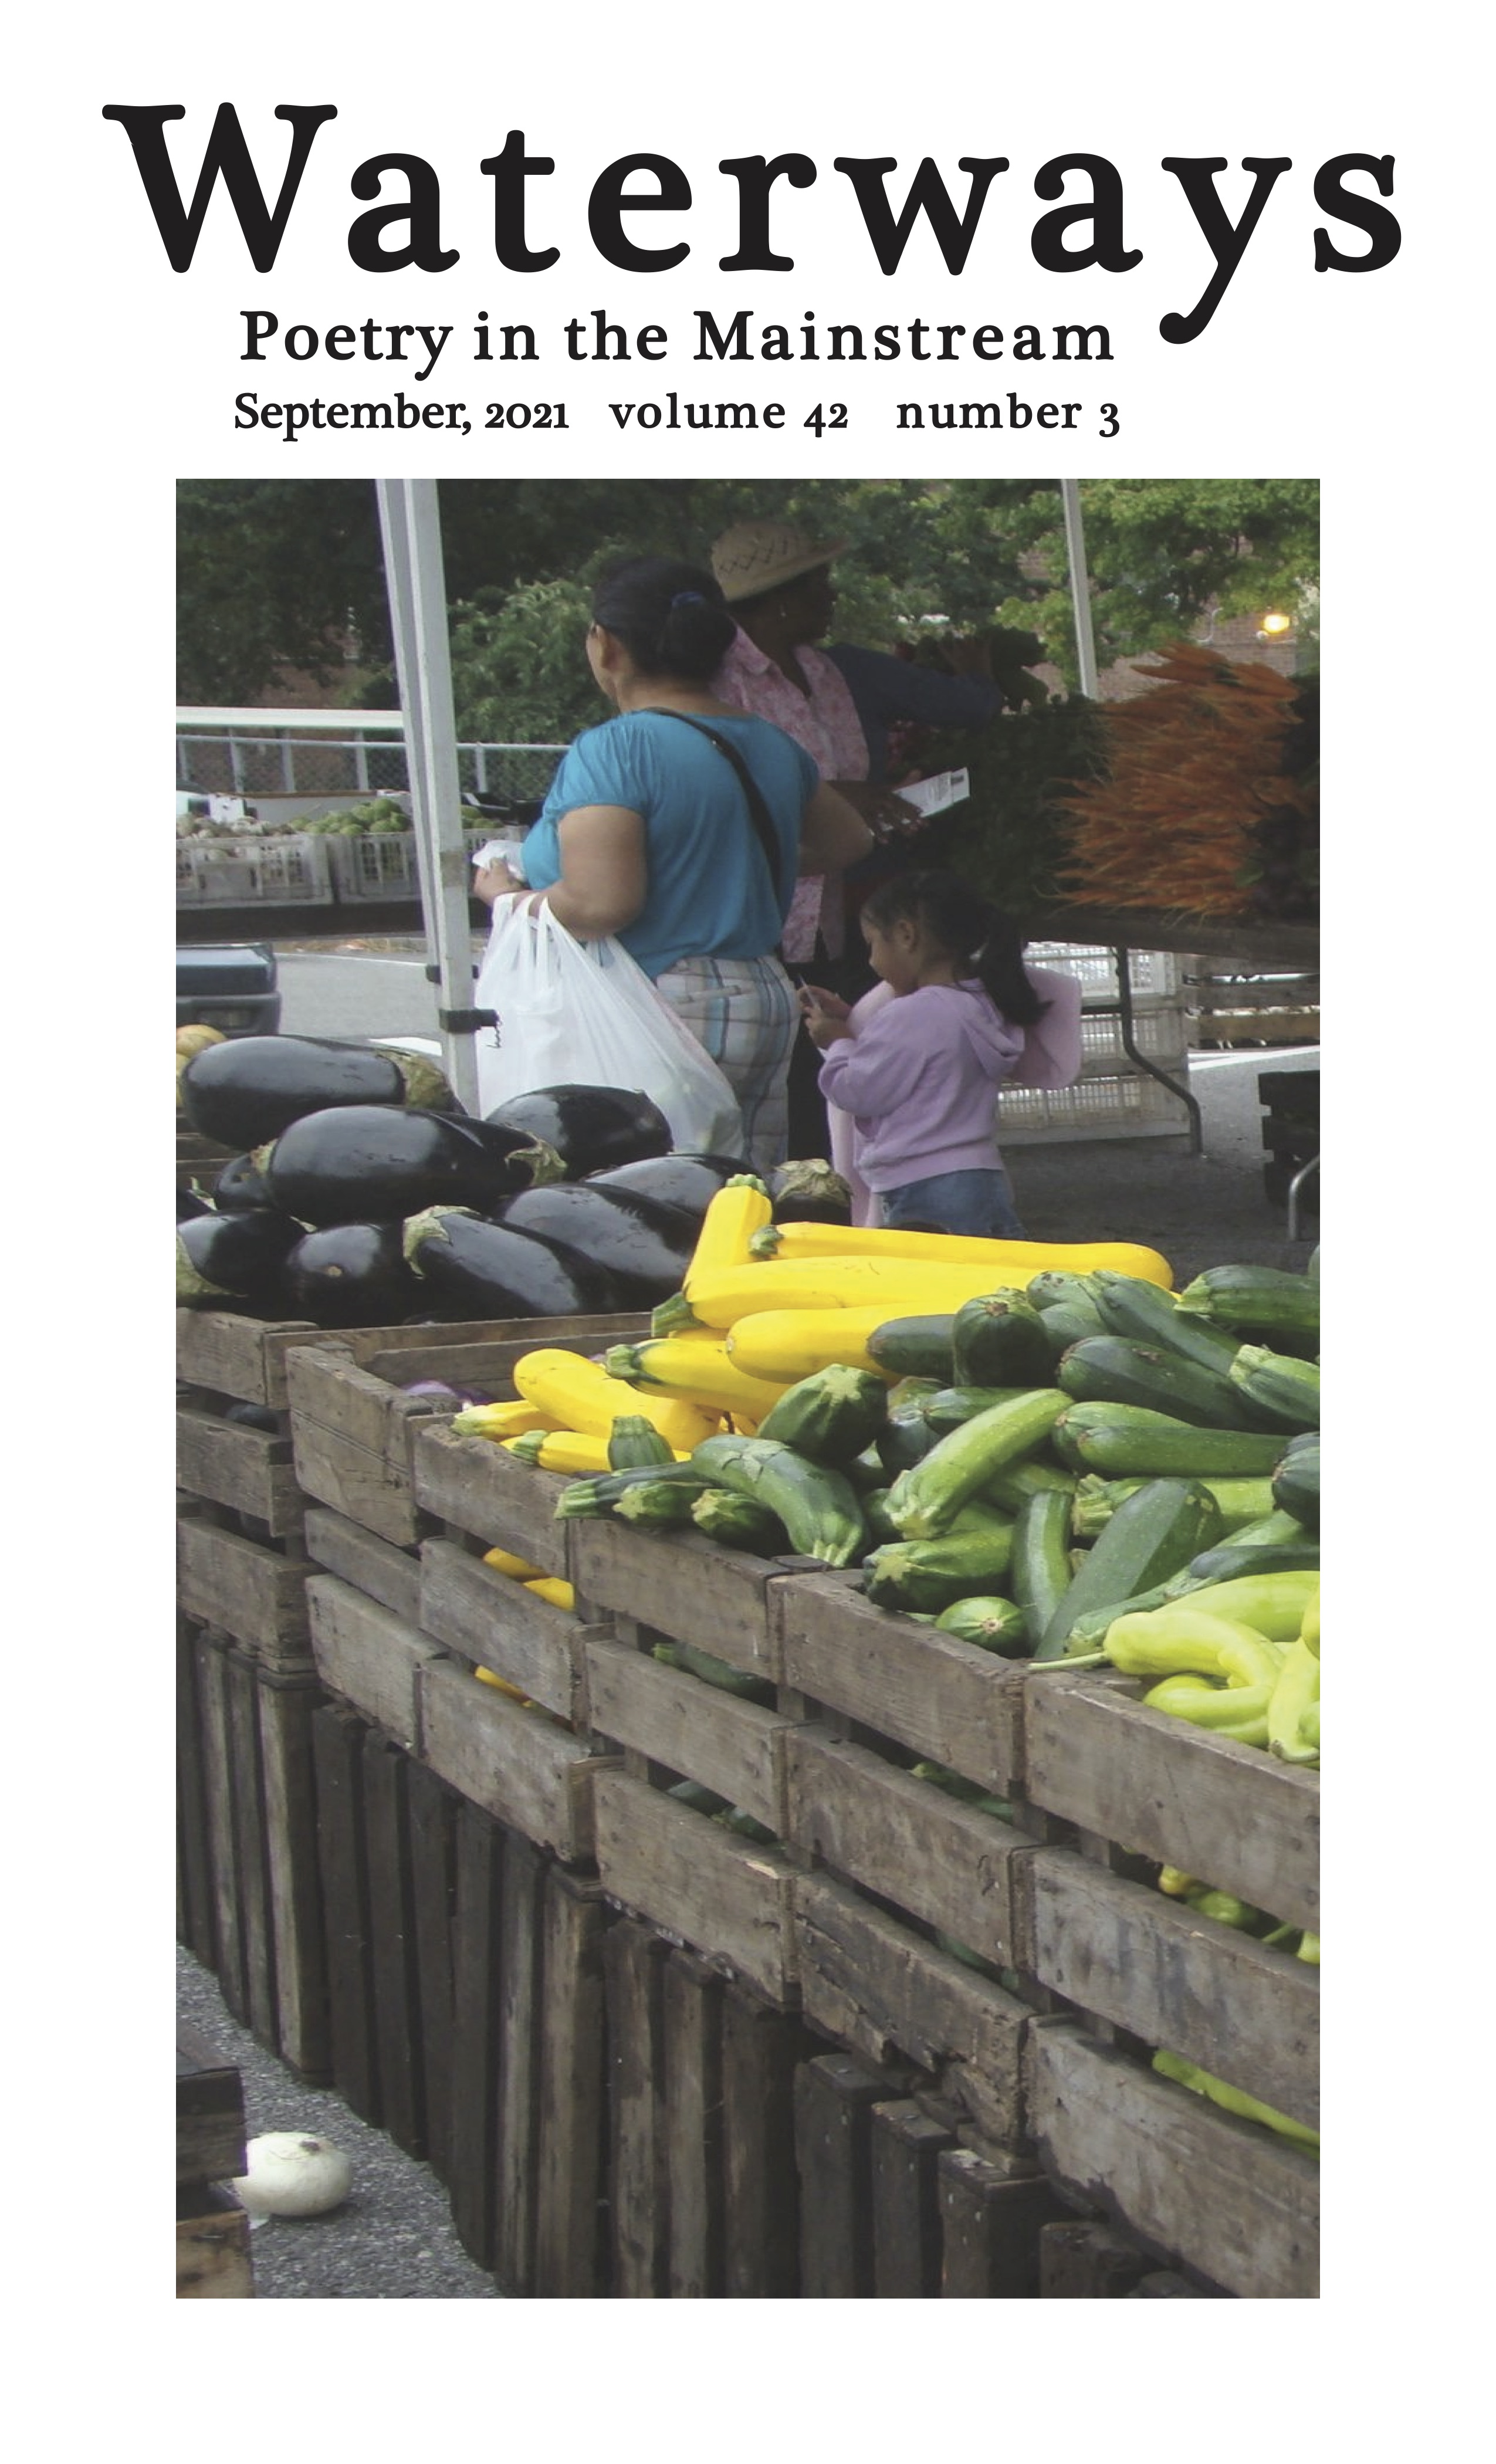 farmers stand with customers and produce with prominent large eggplants and zuccinis